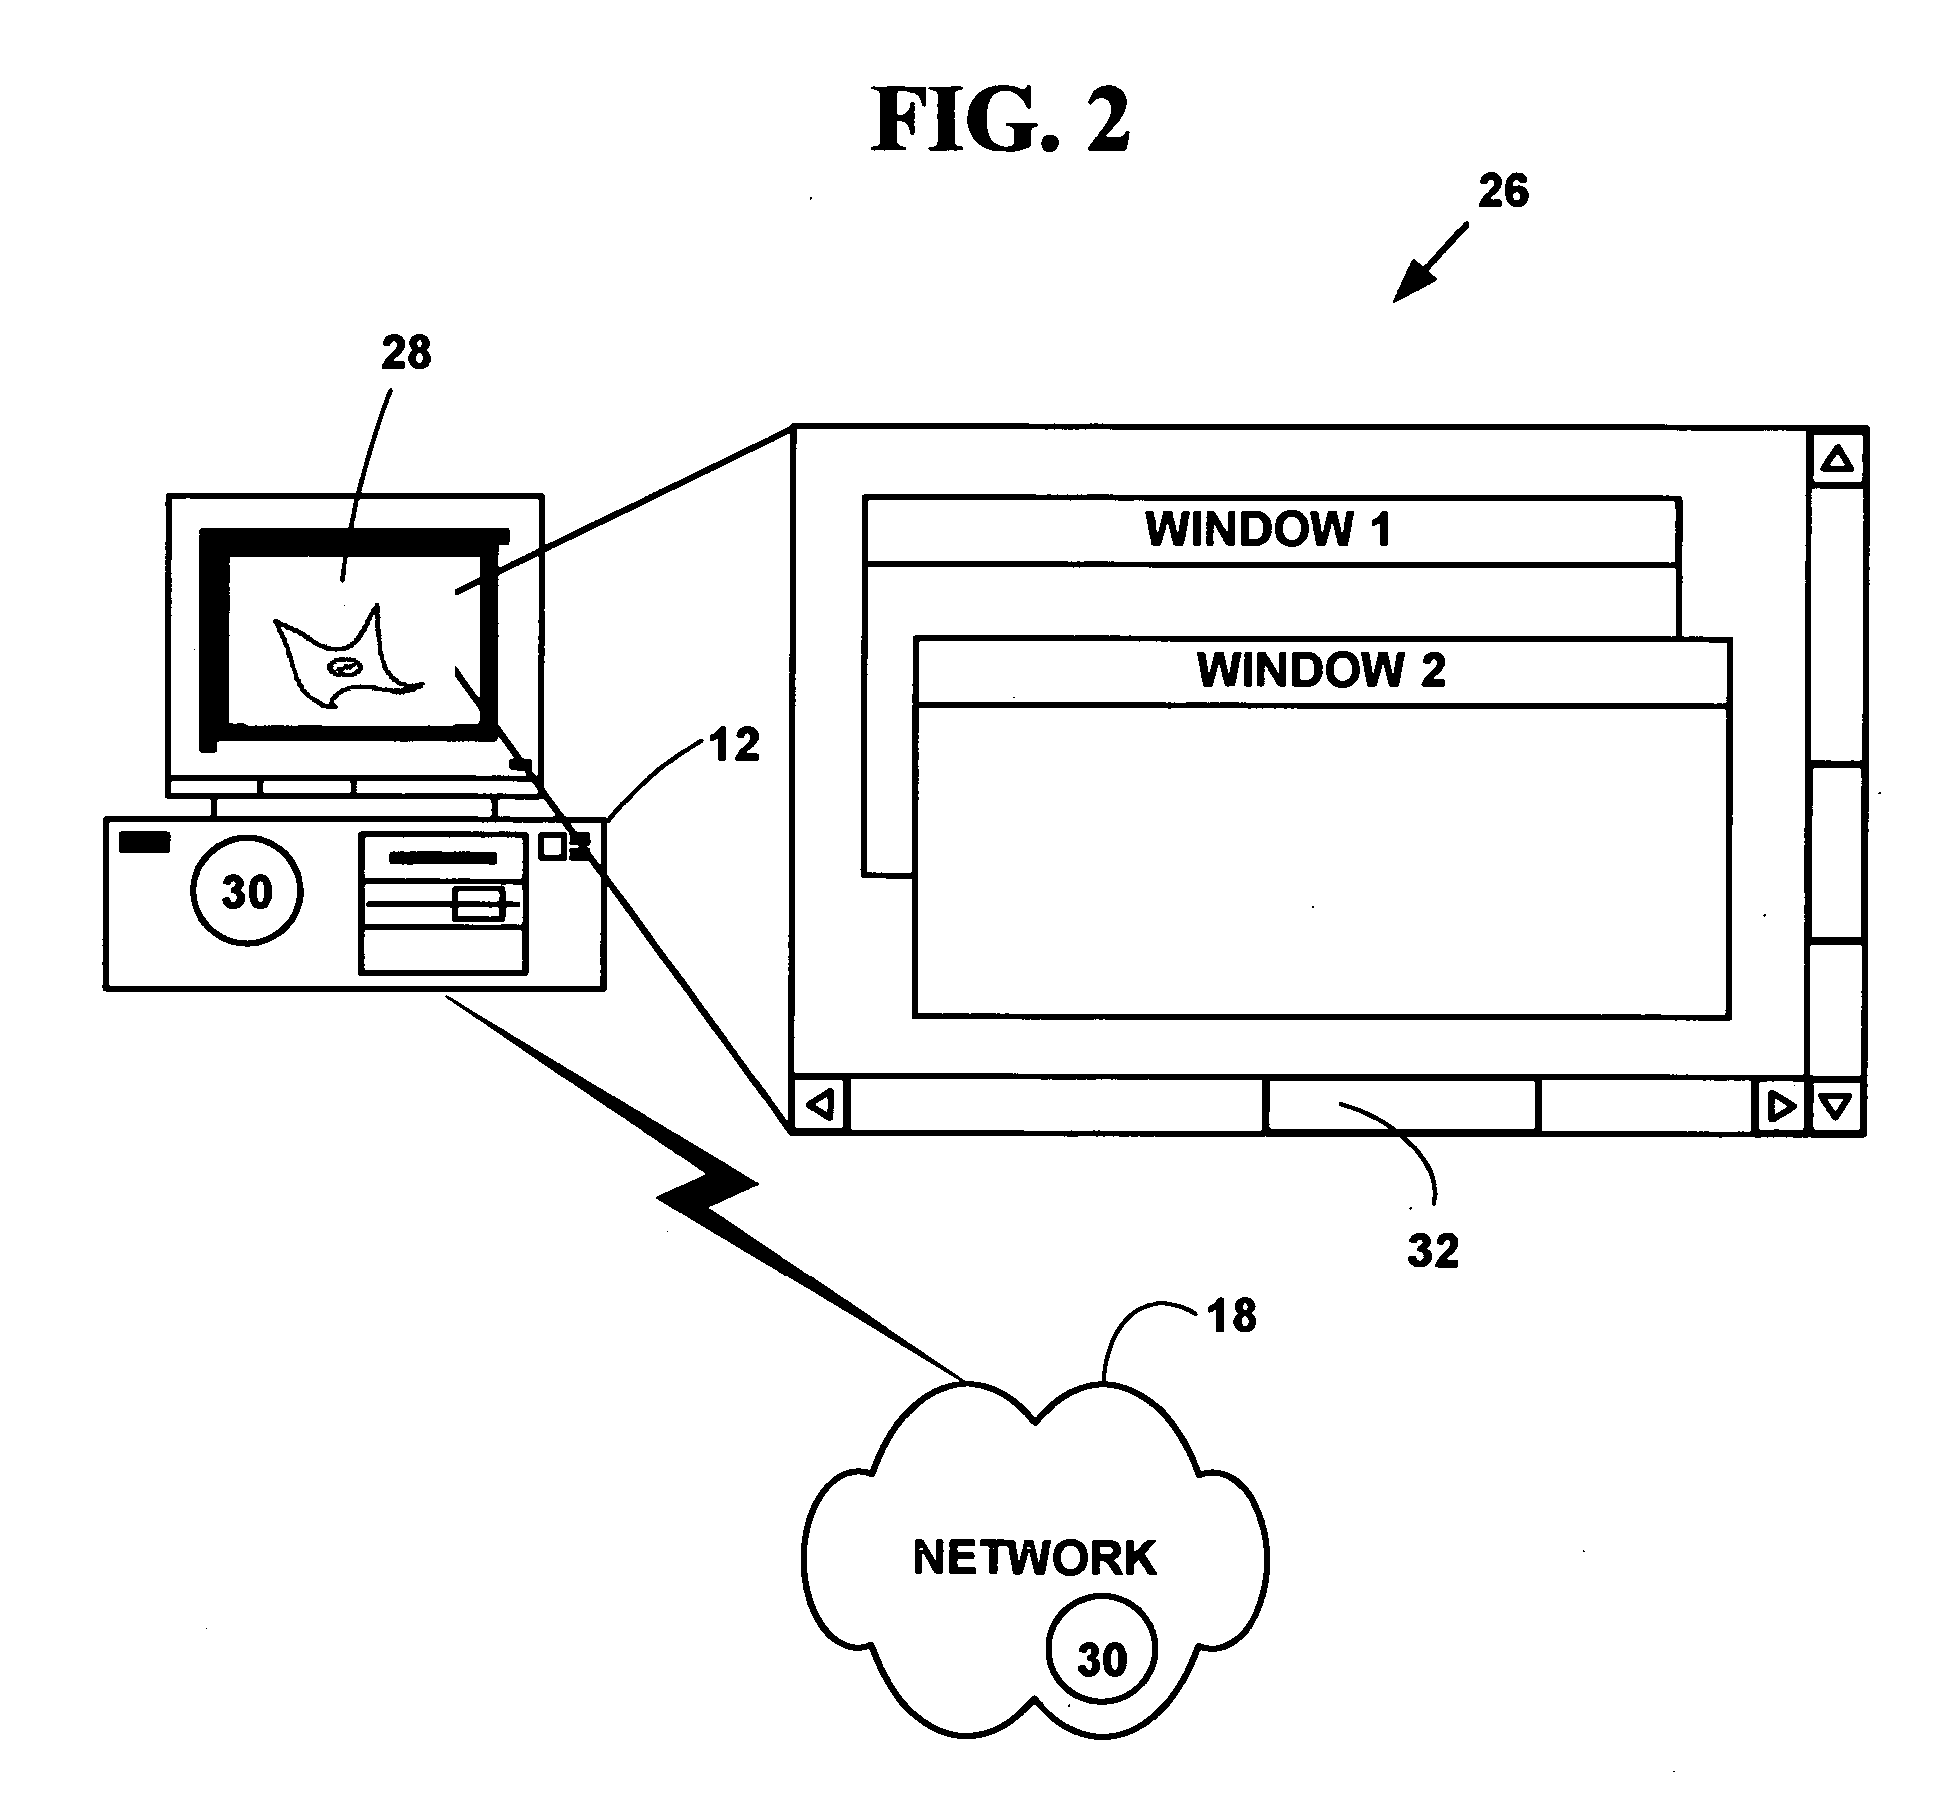 Automated method and system for setting image analysis parameters to control image analysis operations